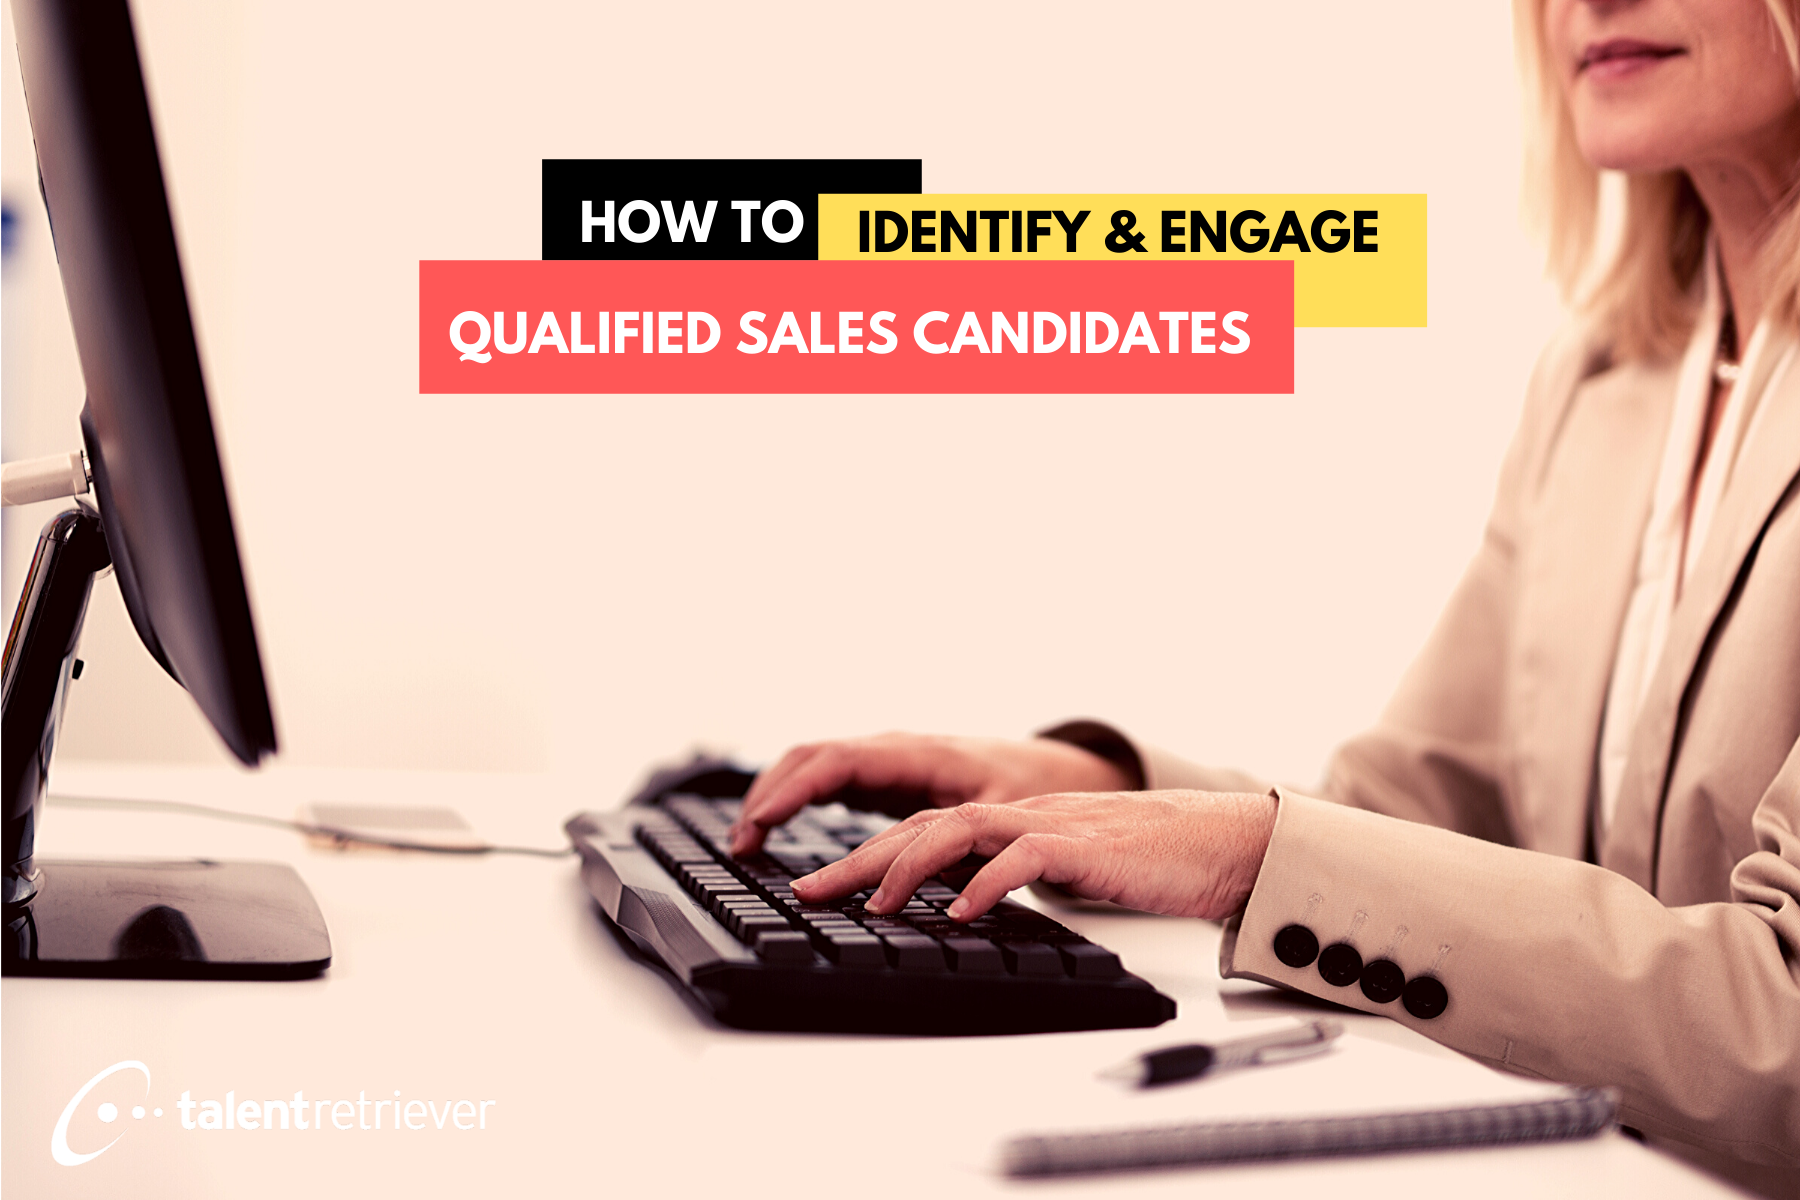 How to Identify and Engage Qualified Sales Candidates